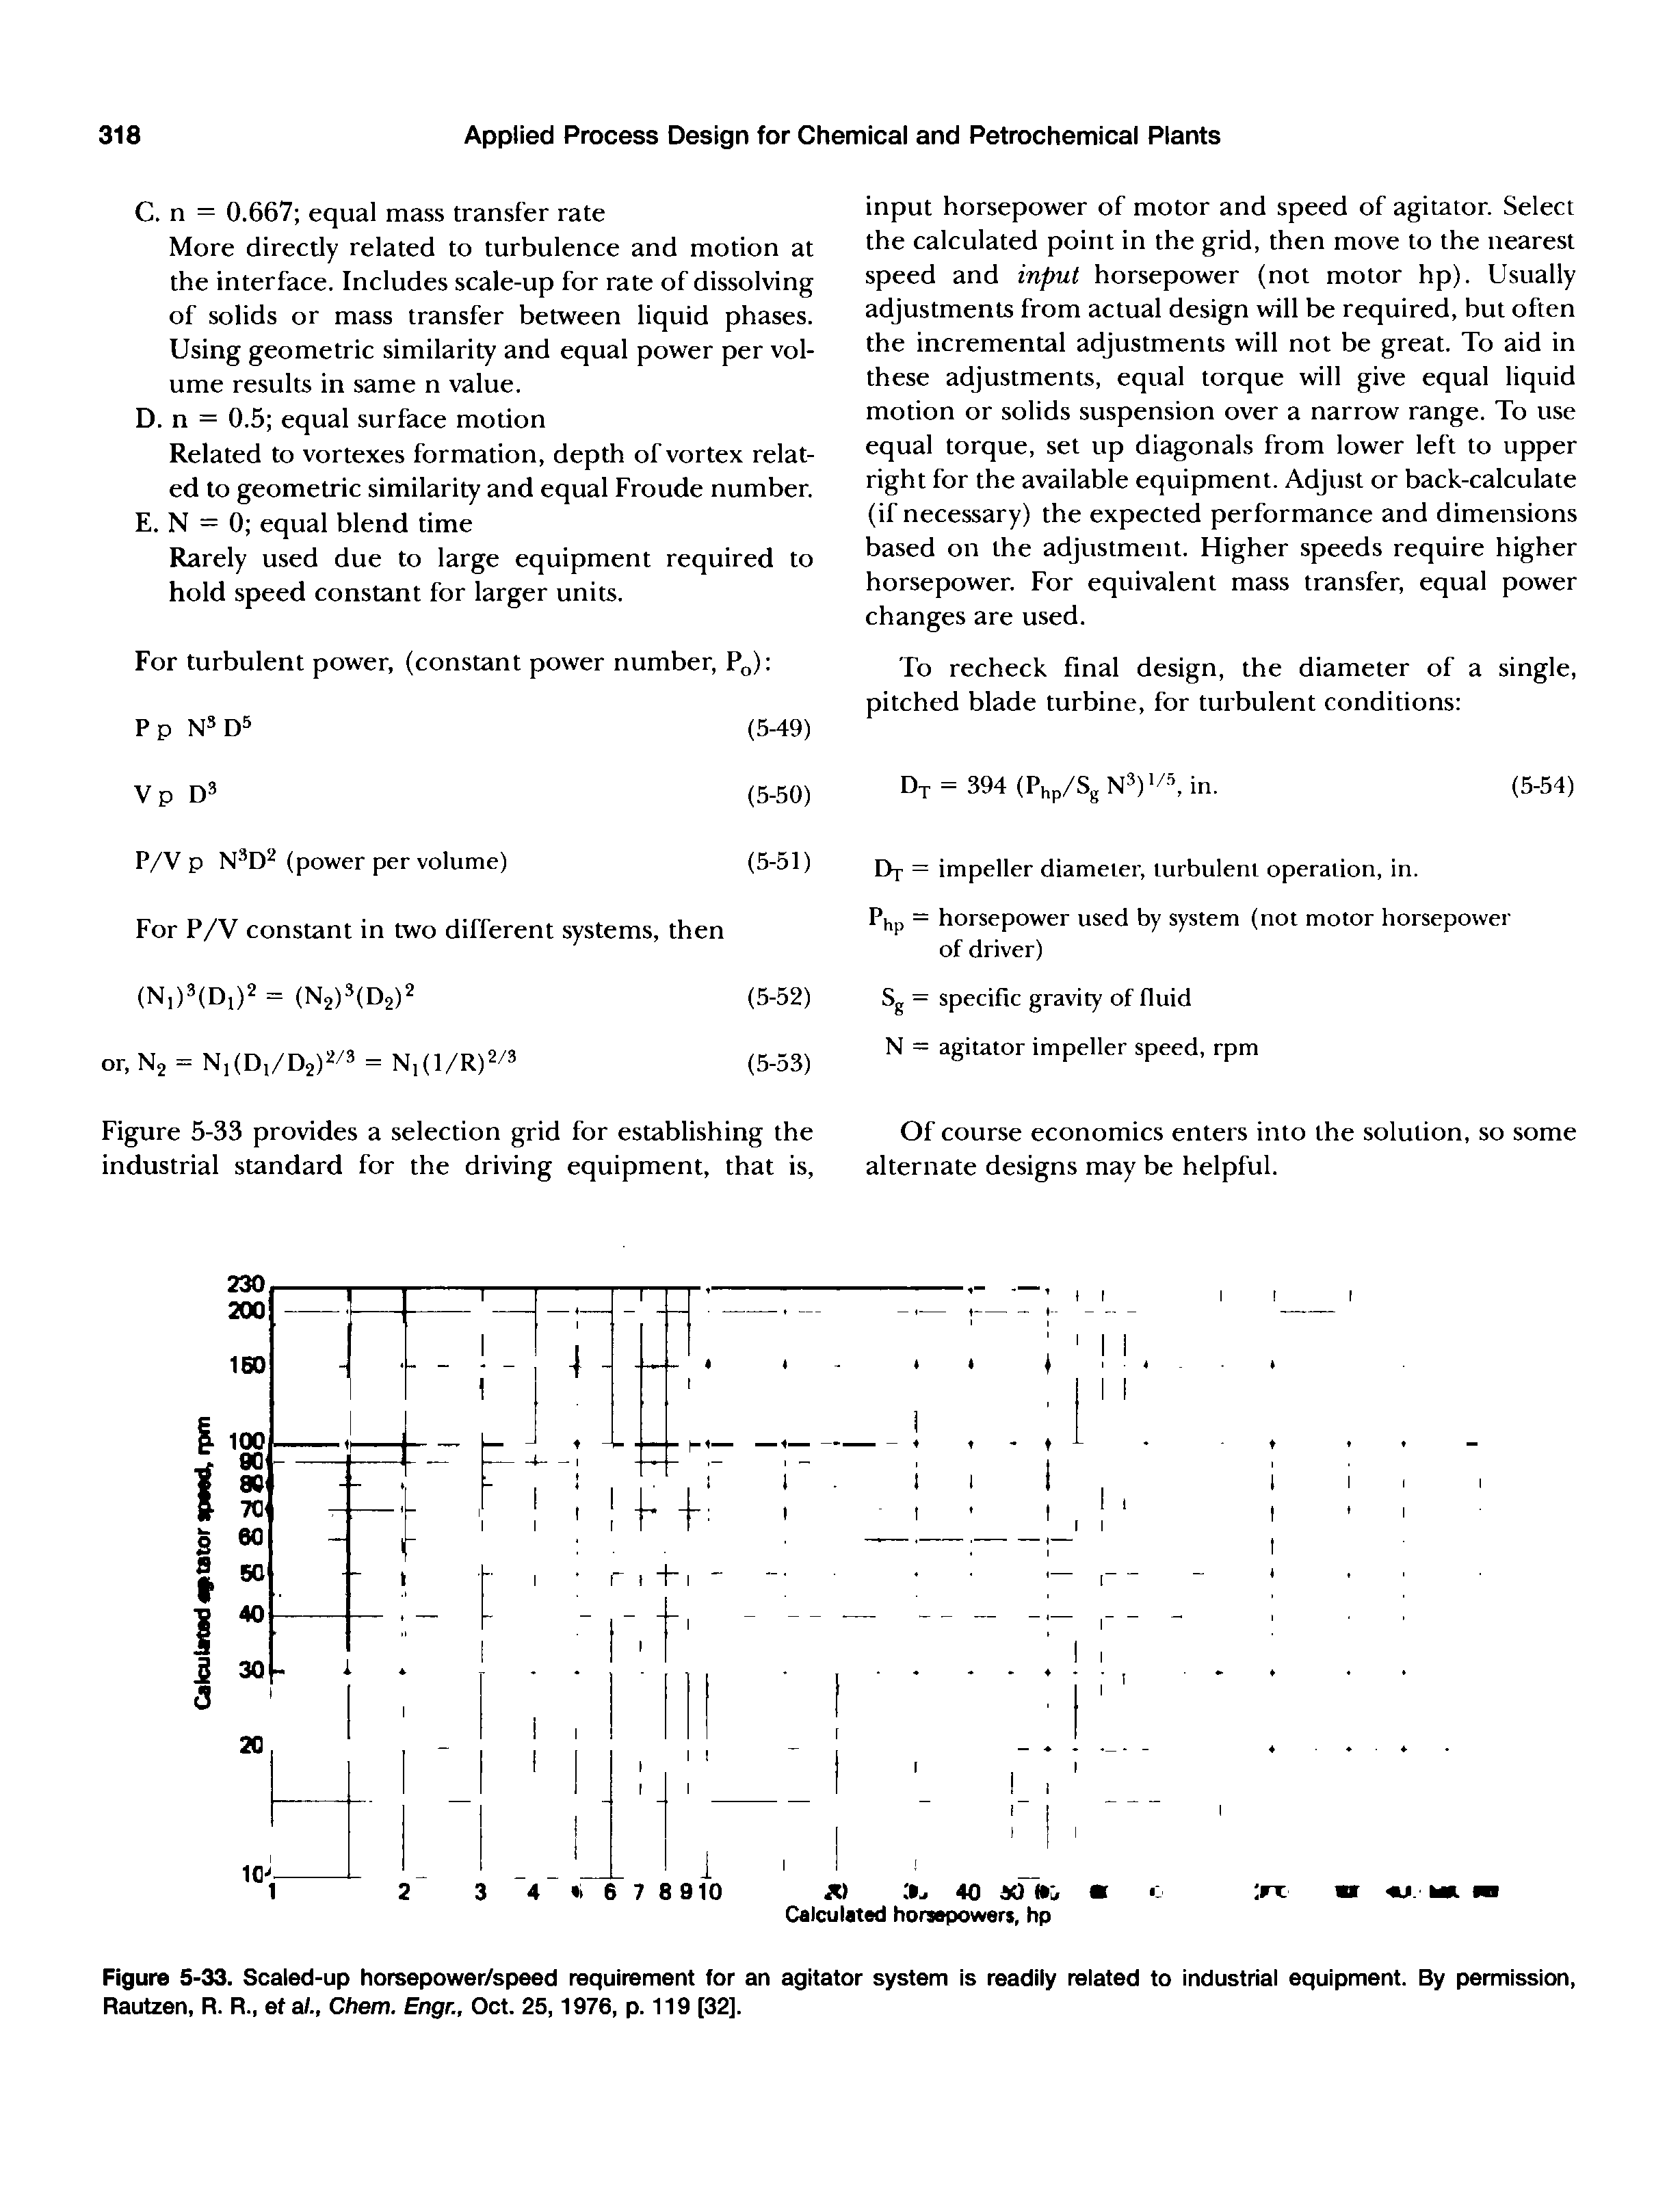 Figure 5-33. Scaled-up horsepower/speed requirement for an agitator system is readily related to industrial equipment. By permission, Rautzen, R. R., ef a/., Chem. Engr., Oct. 25,1976, p. 119 [32].